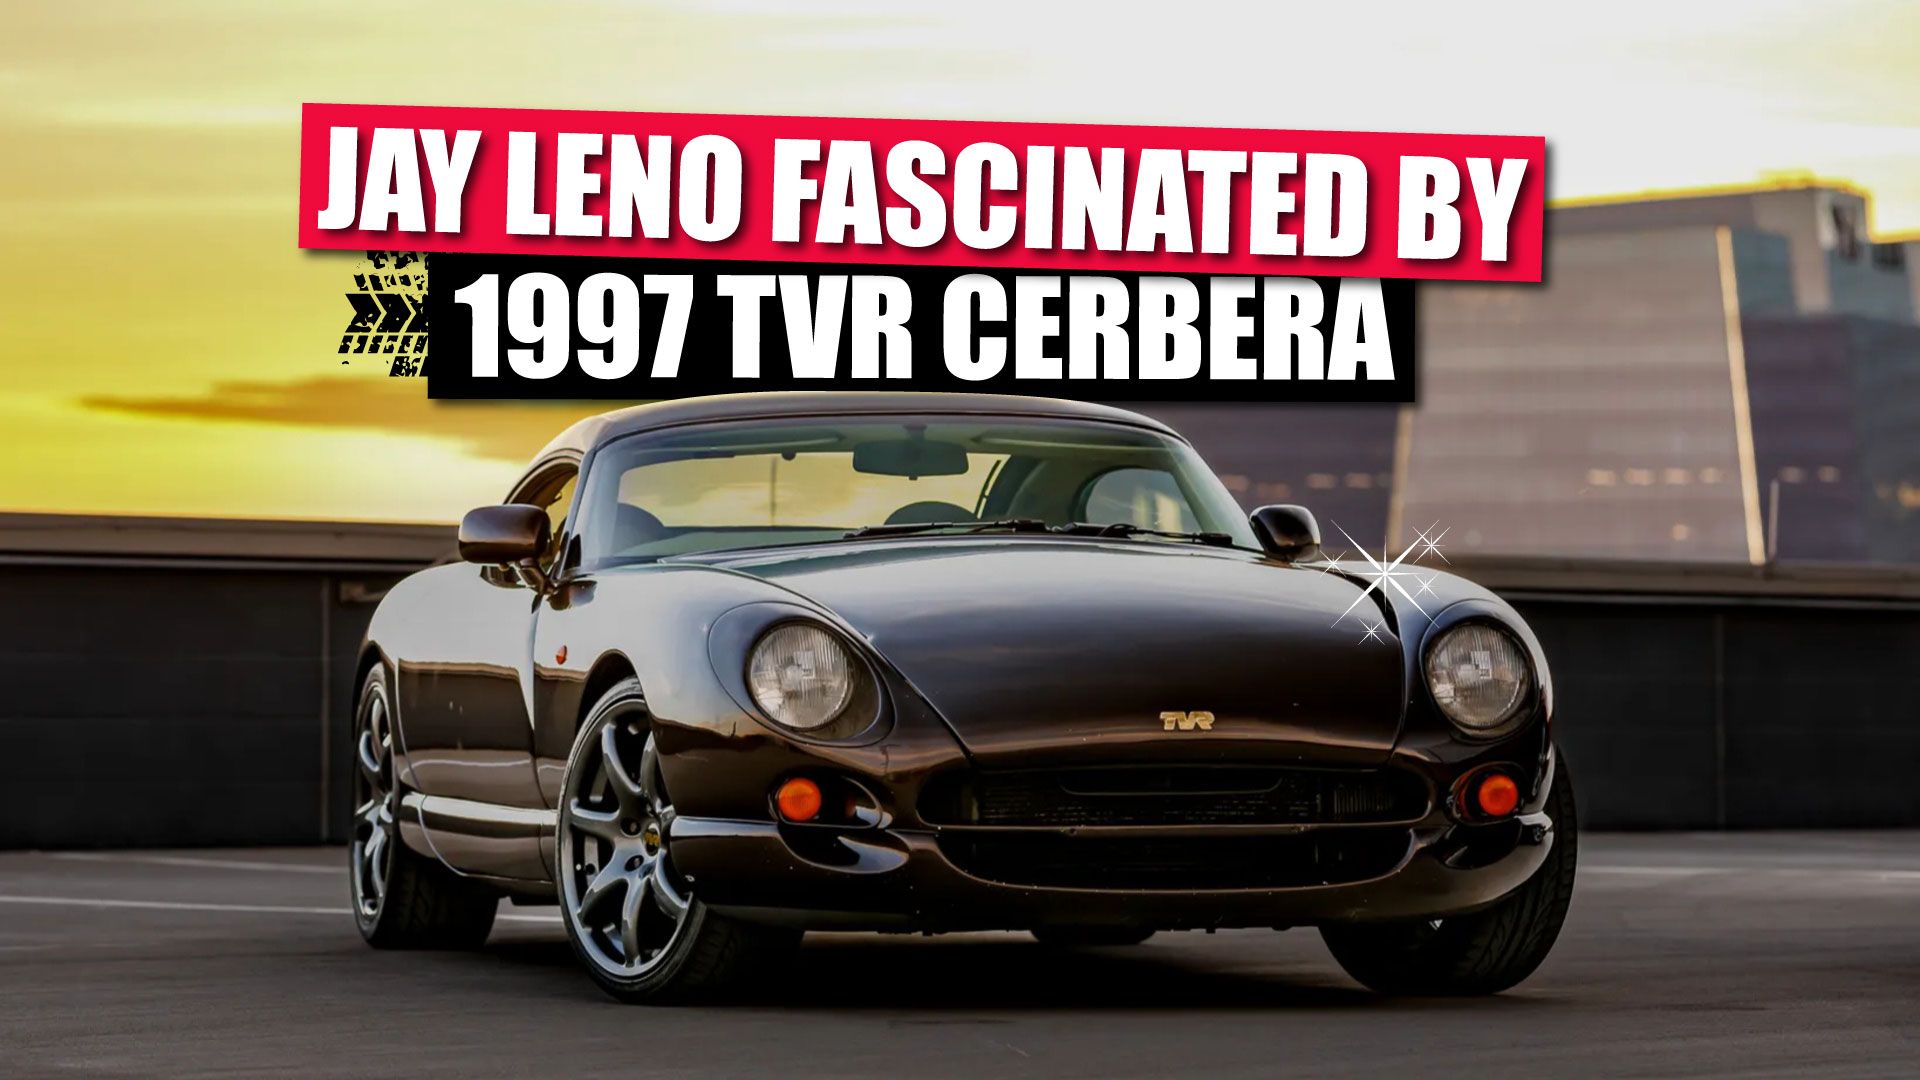 Why Jay Leno Calls The 1997 TVR Cerbera "Fascinating"